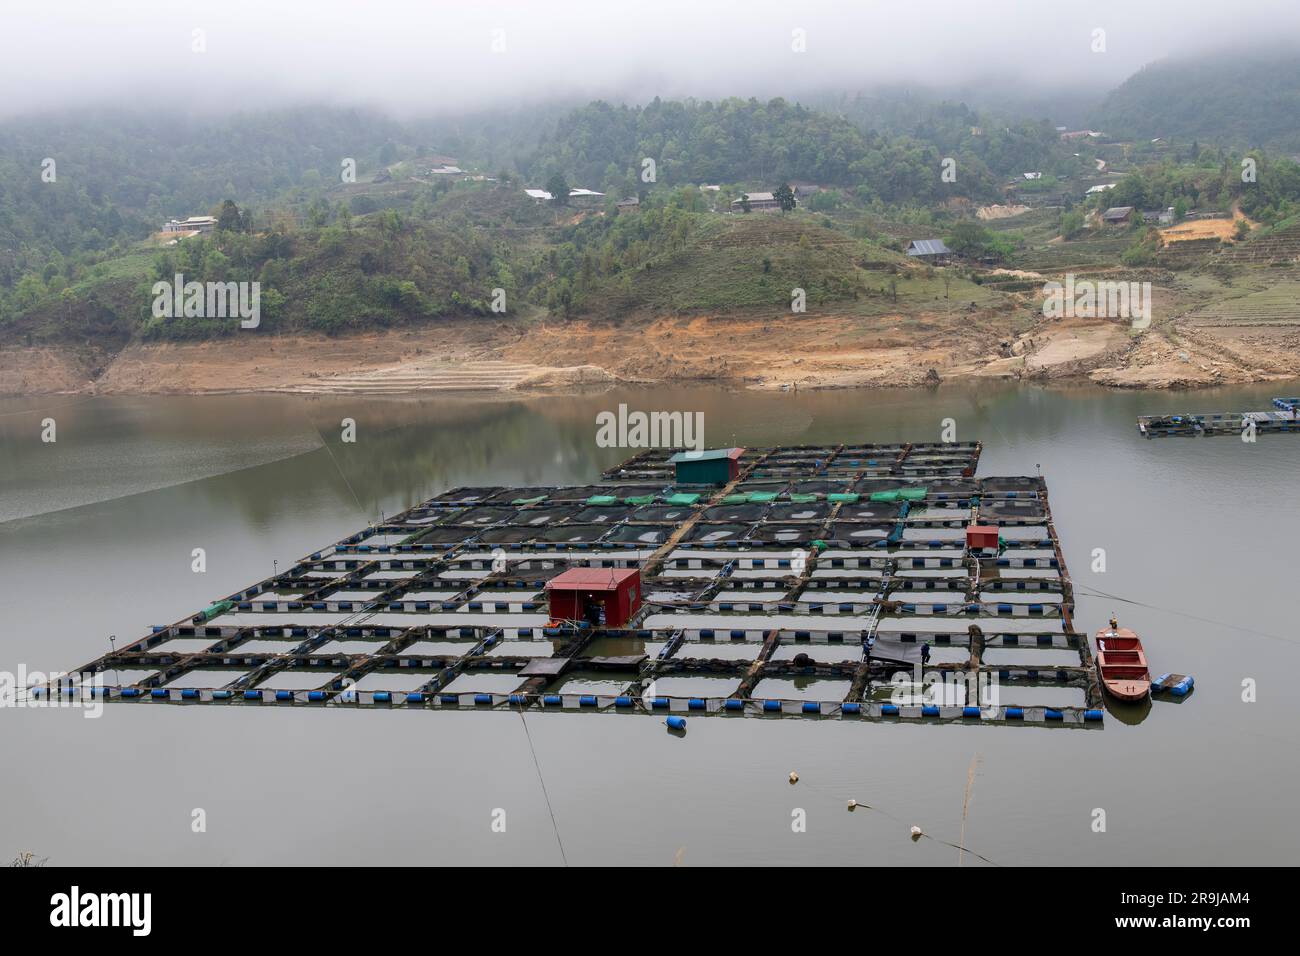 Ta Van, Sa Pa, Vietnam-April 2023; Net pens or cages for raising farmed fish, floating in the man-made Seo My Ty Sapa Lake Stock Photo